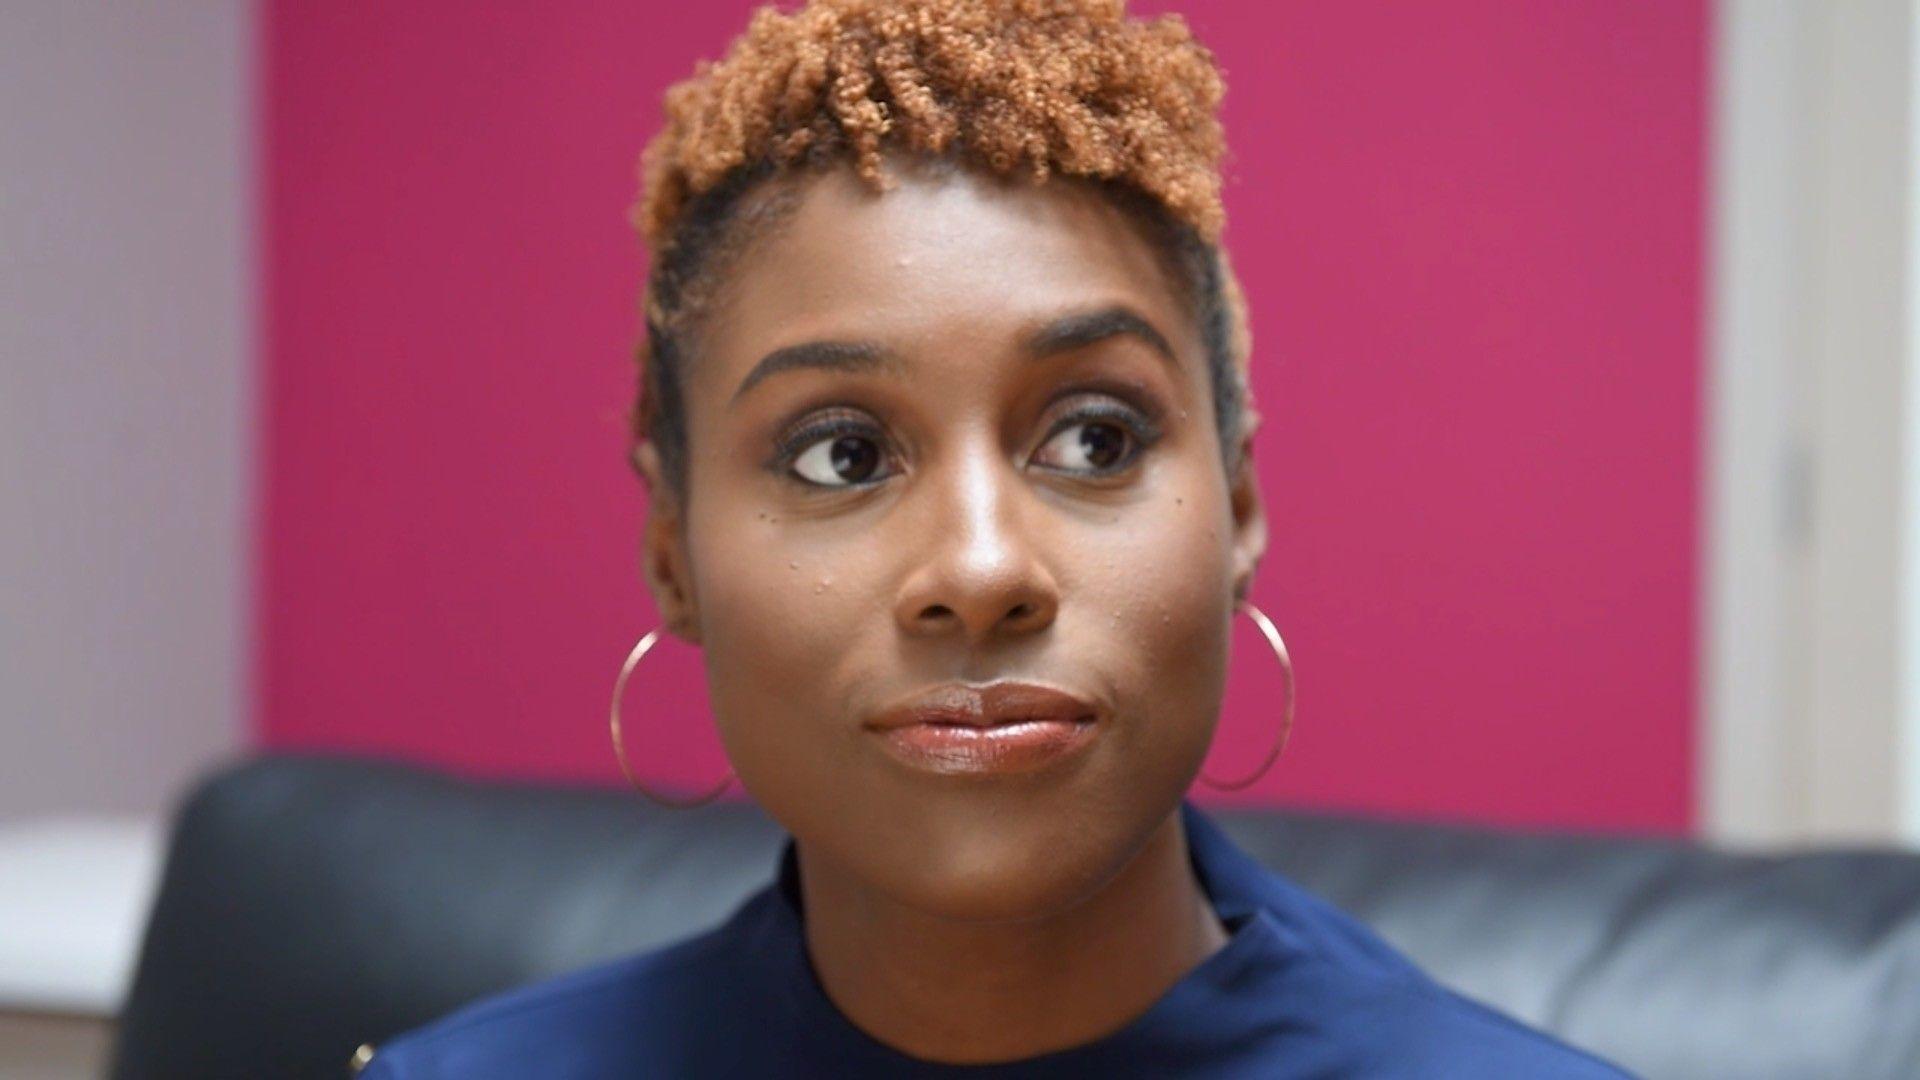 Issa Rae and cast make new HBO comedy 'Insecure' easy to care